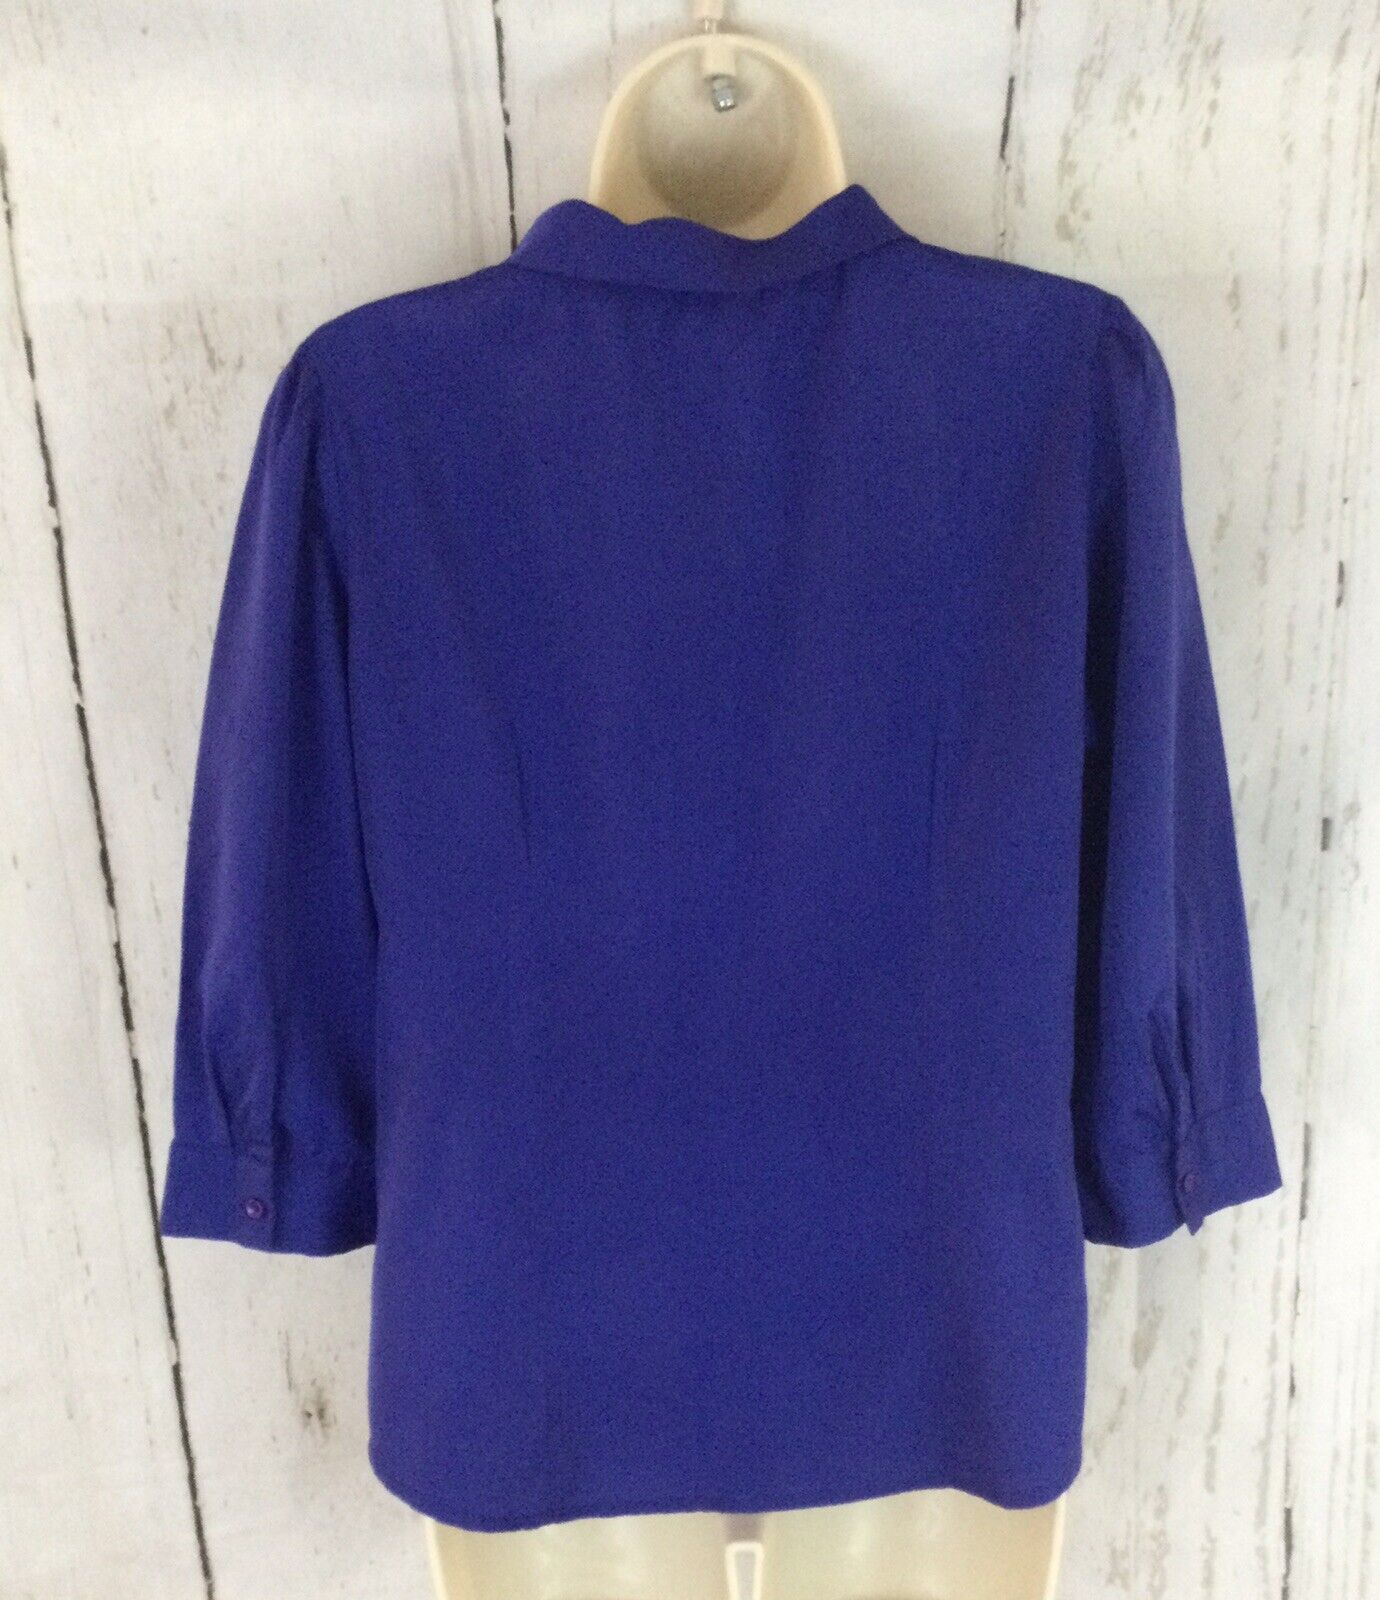 Wills Classic Blouse With Tie Royal Blue Lg - image 2